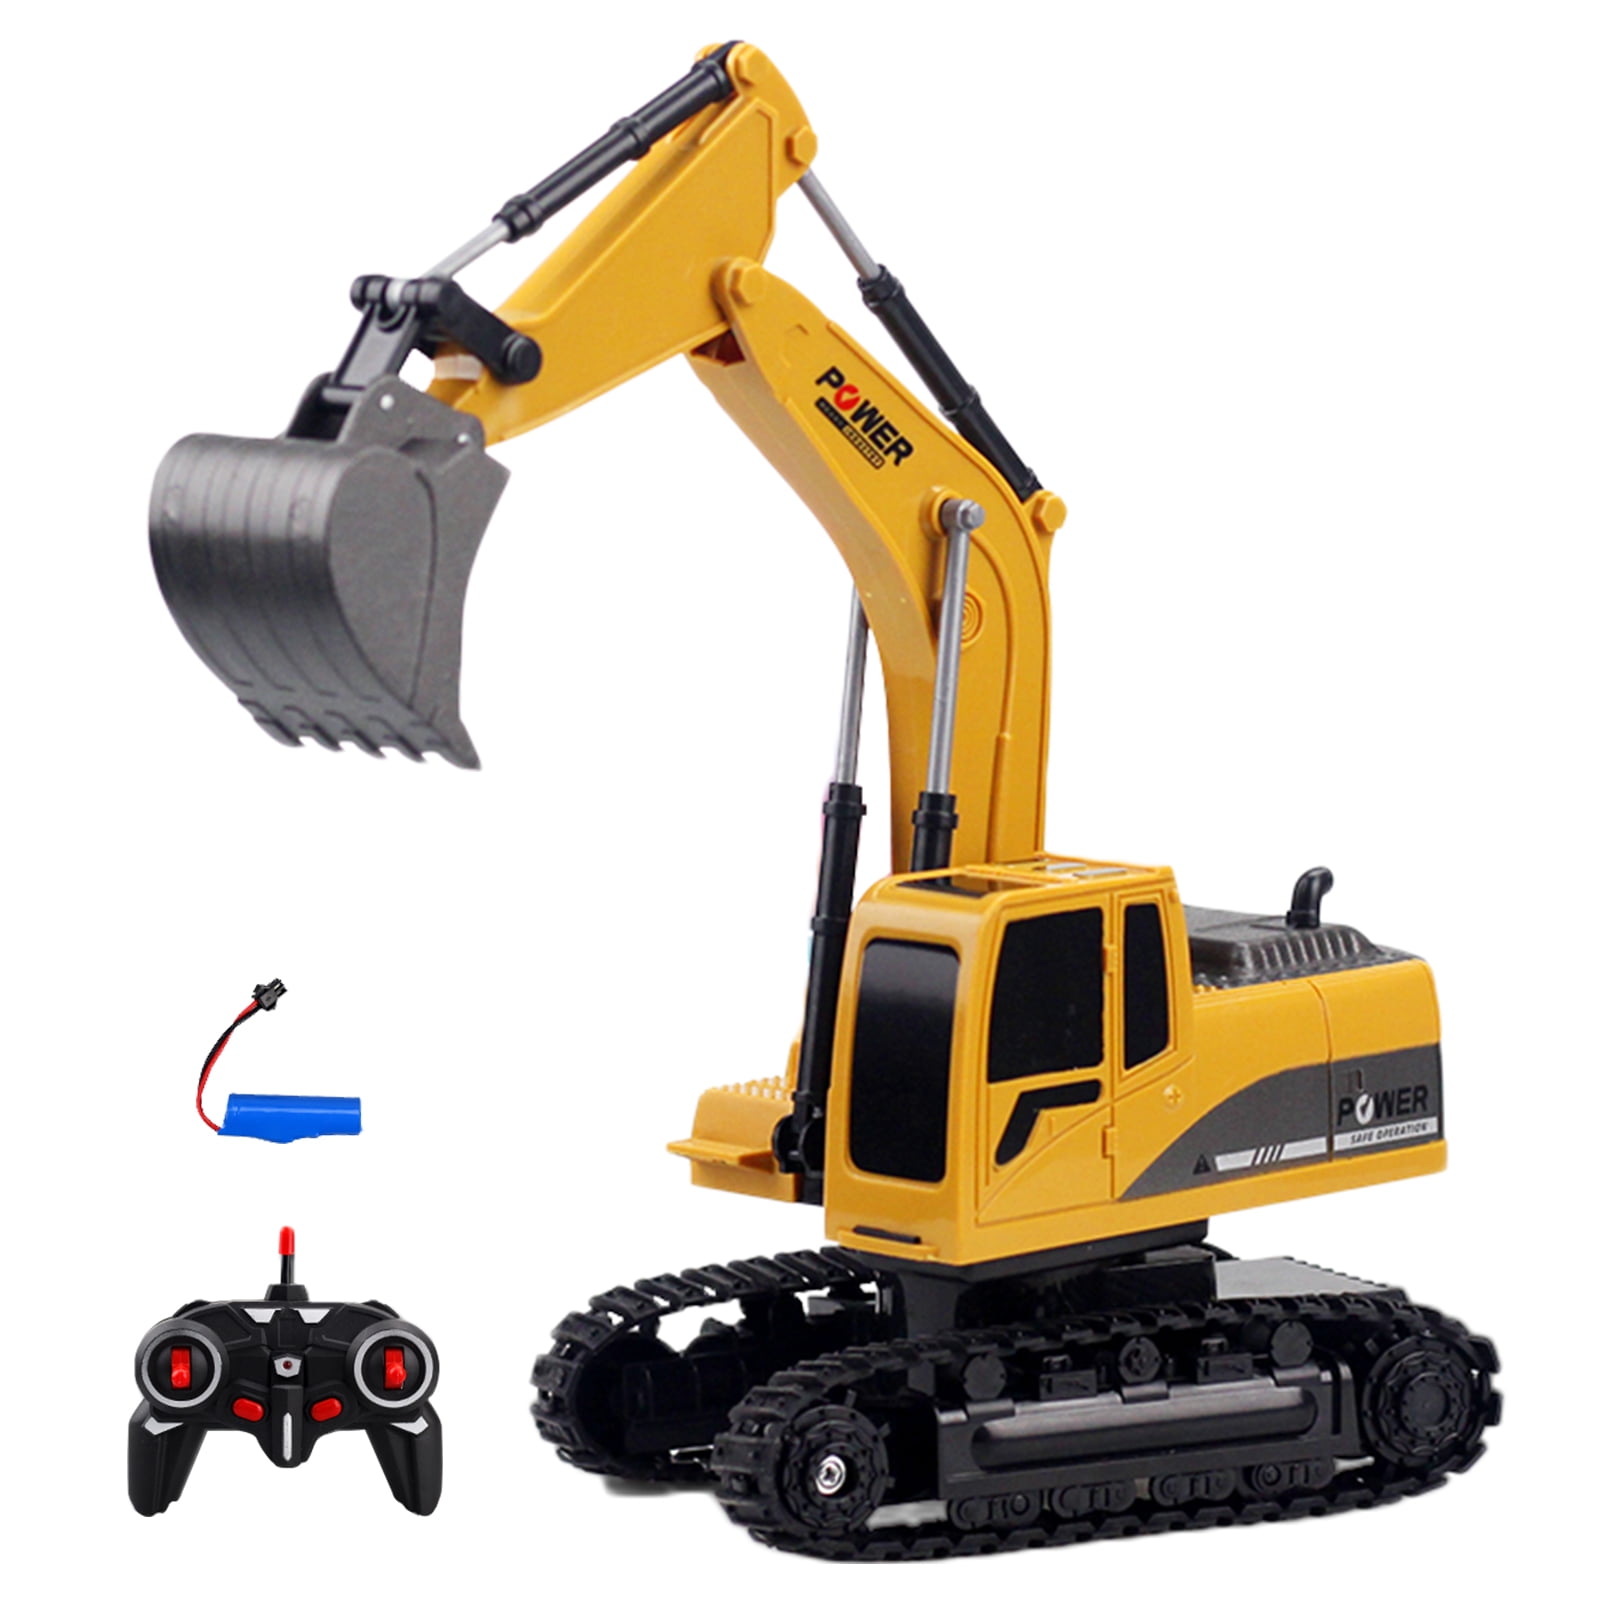 Toy Digger Remote Control Digger Excavator Toy Construction Vehicle 